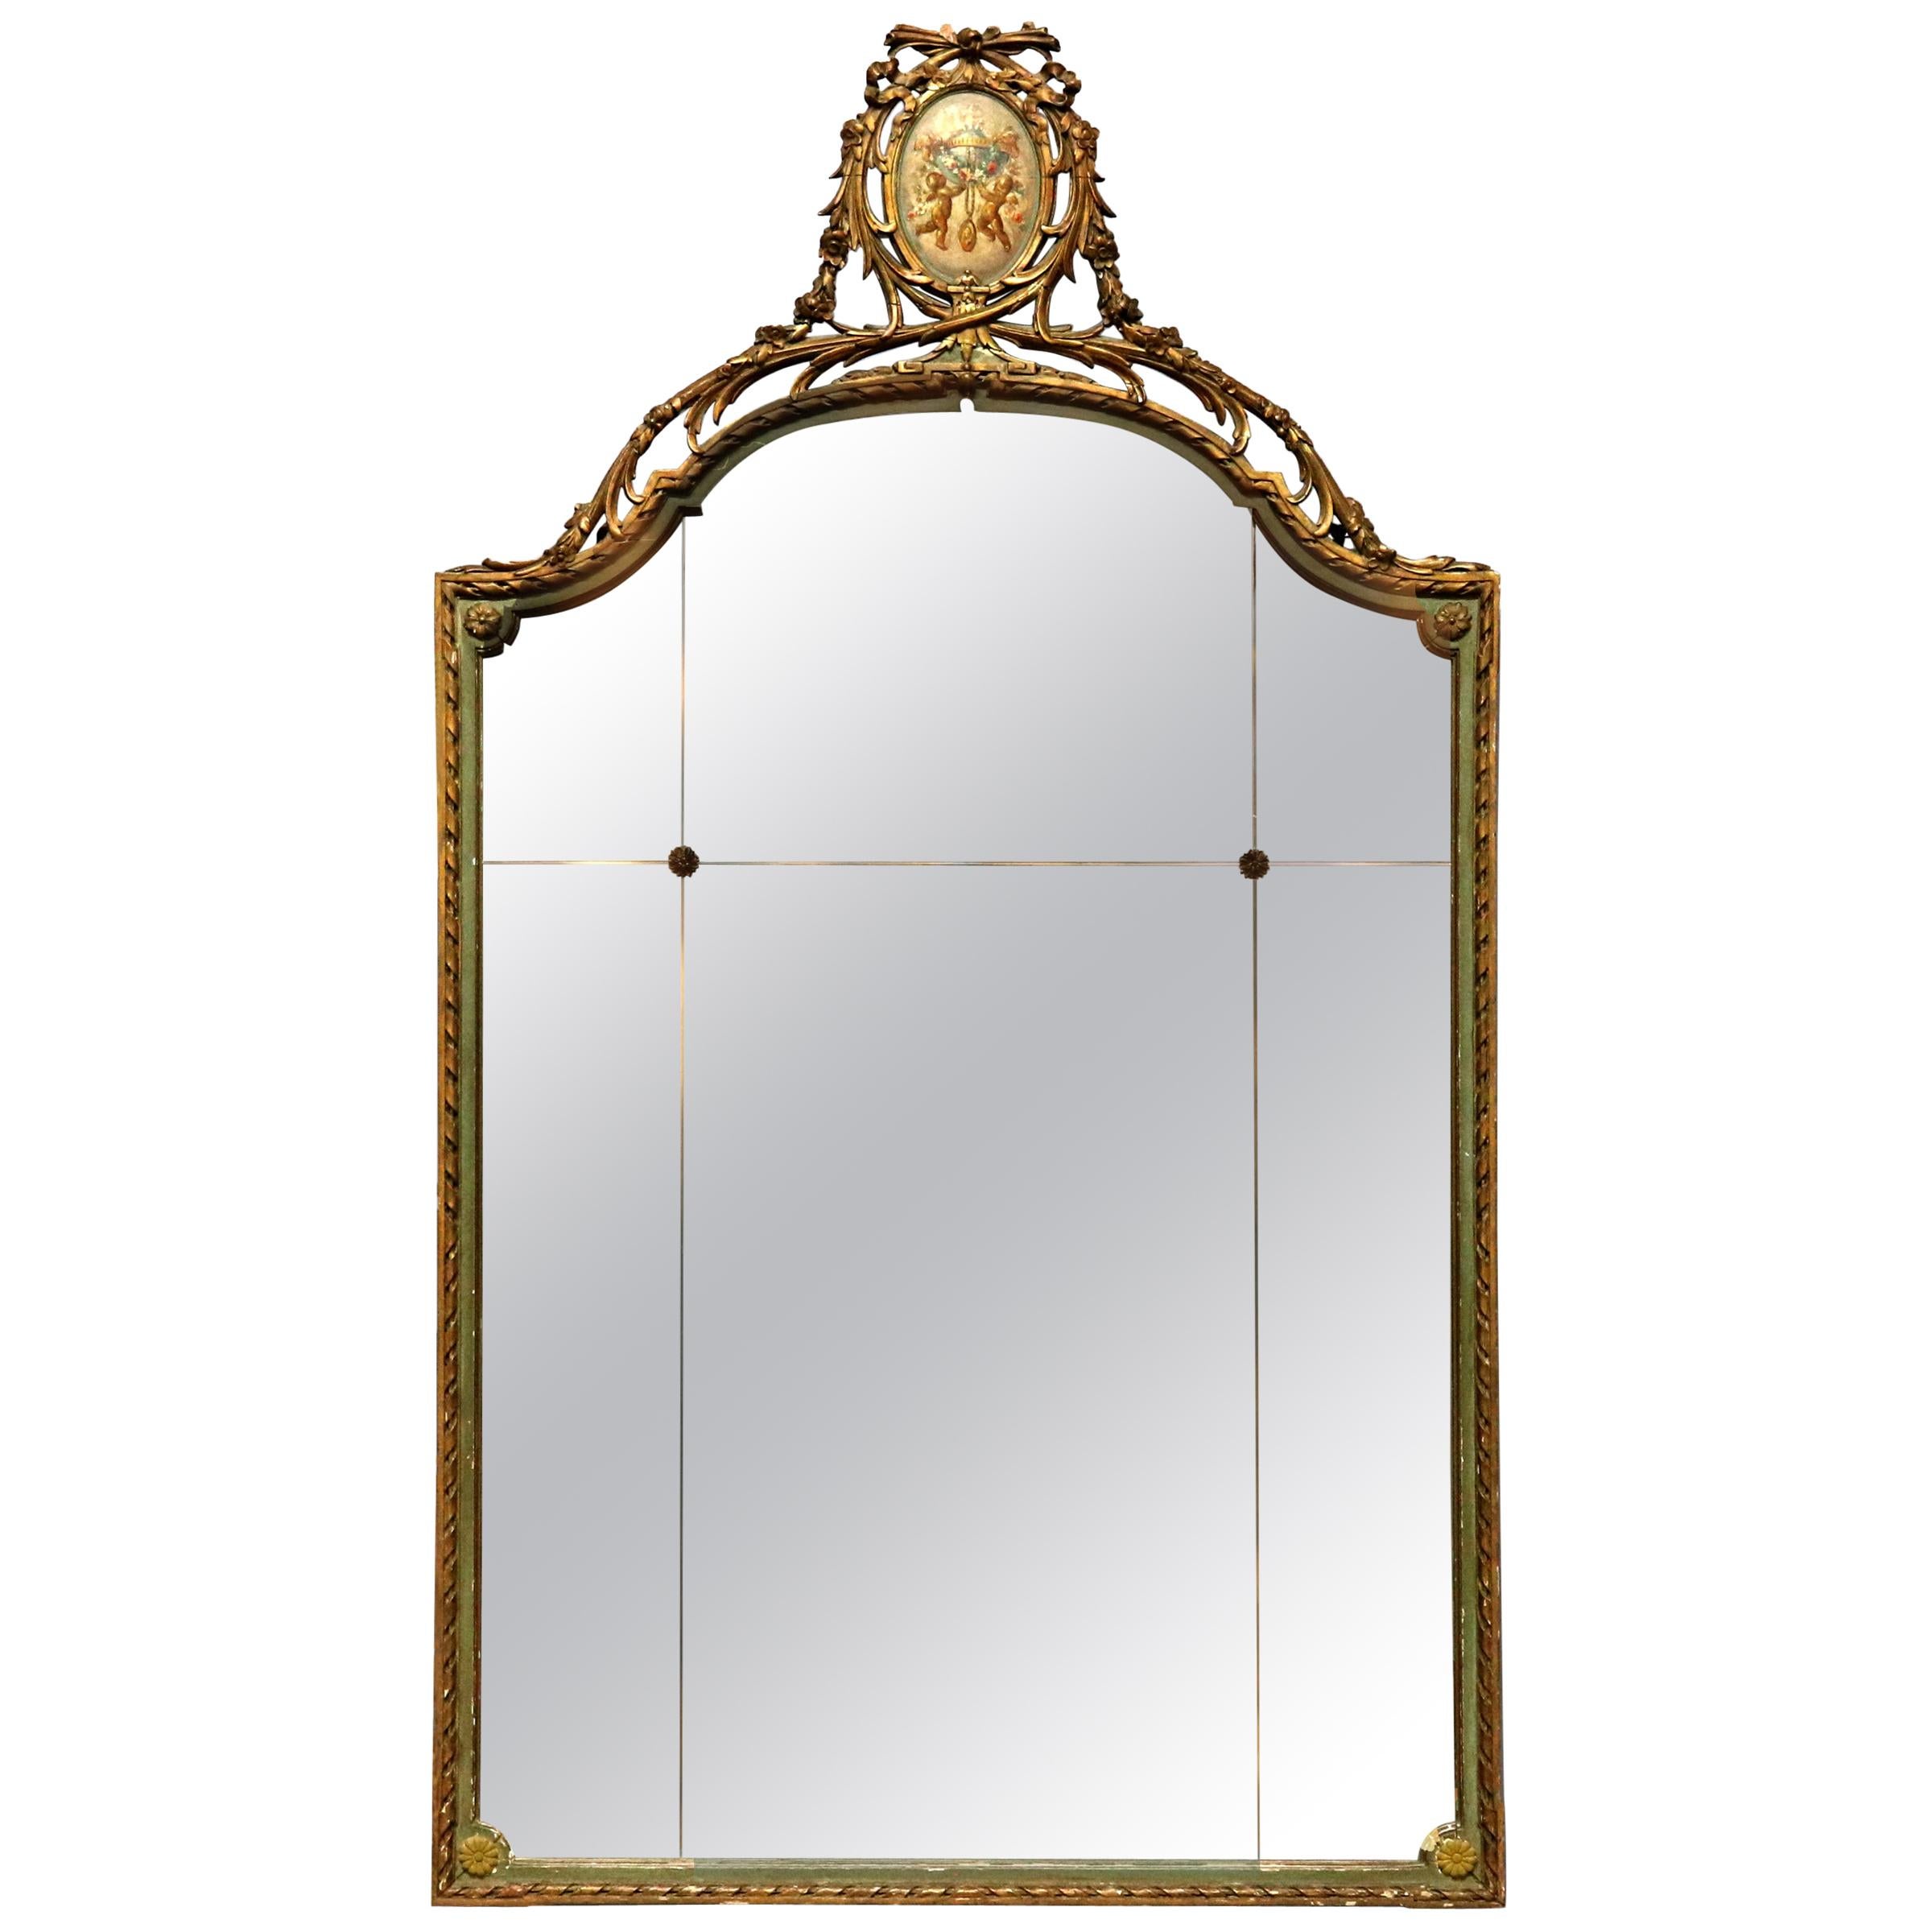 Antique Large French Style Adams Decorated & Giltwood Wall Mirror, Circa 1920